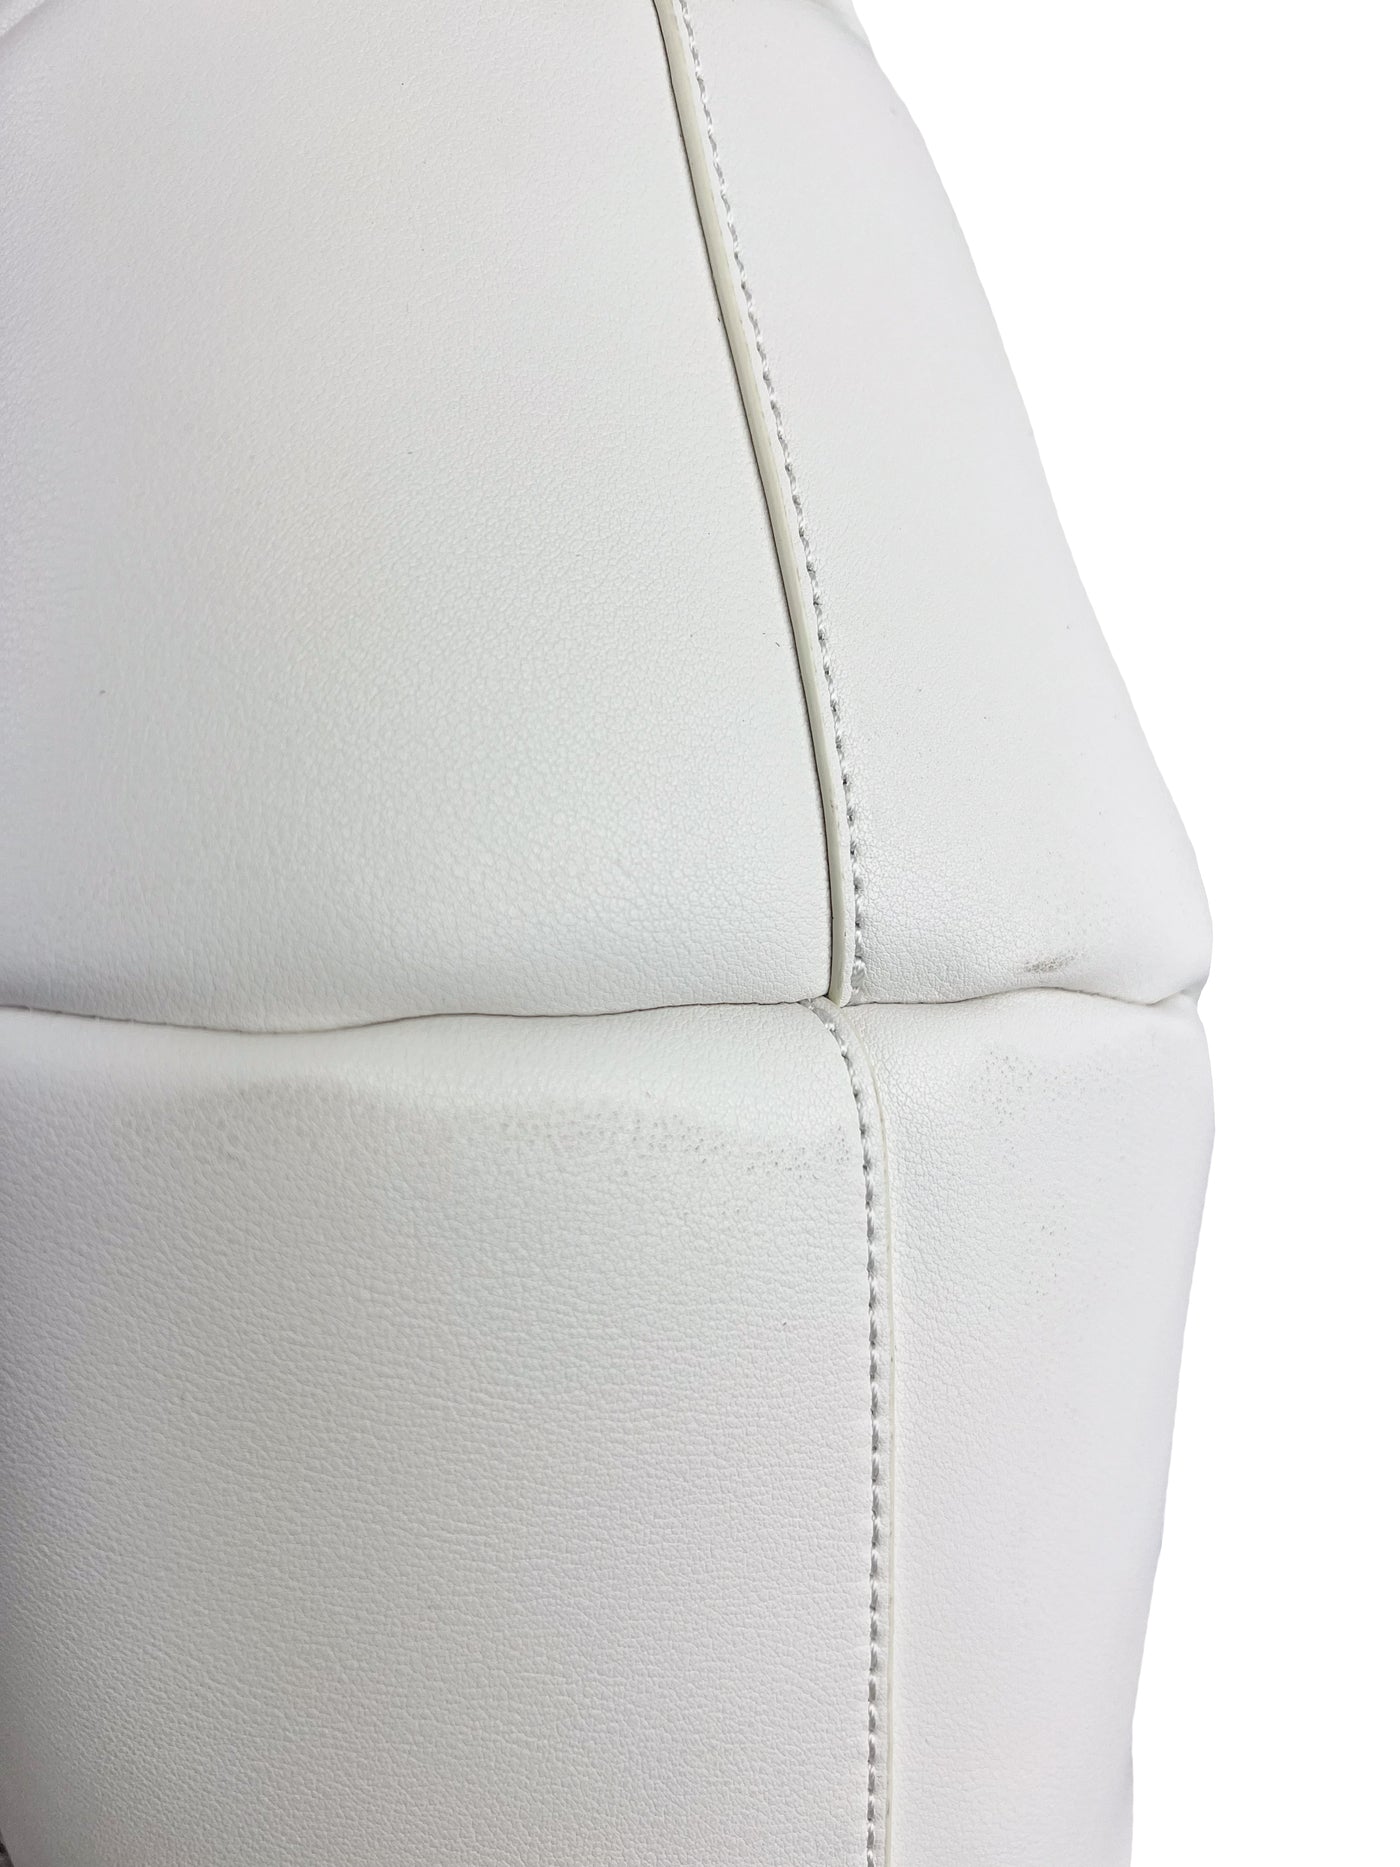 Exclusive Designer Twisted 208 Leather Handbag in White - Discounts on Exclusive Designer at UAL